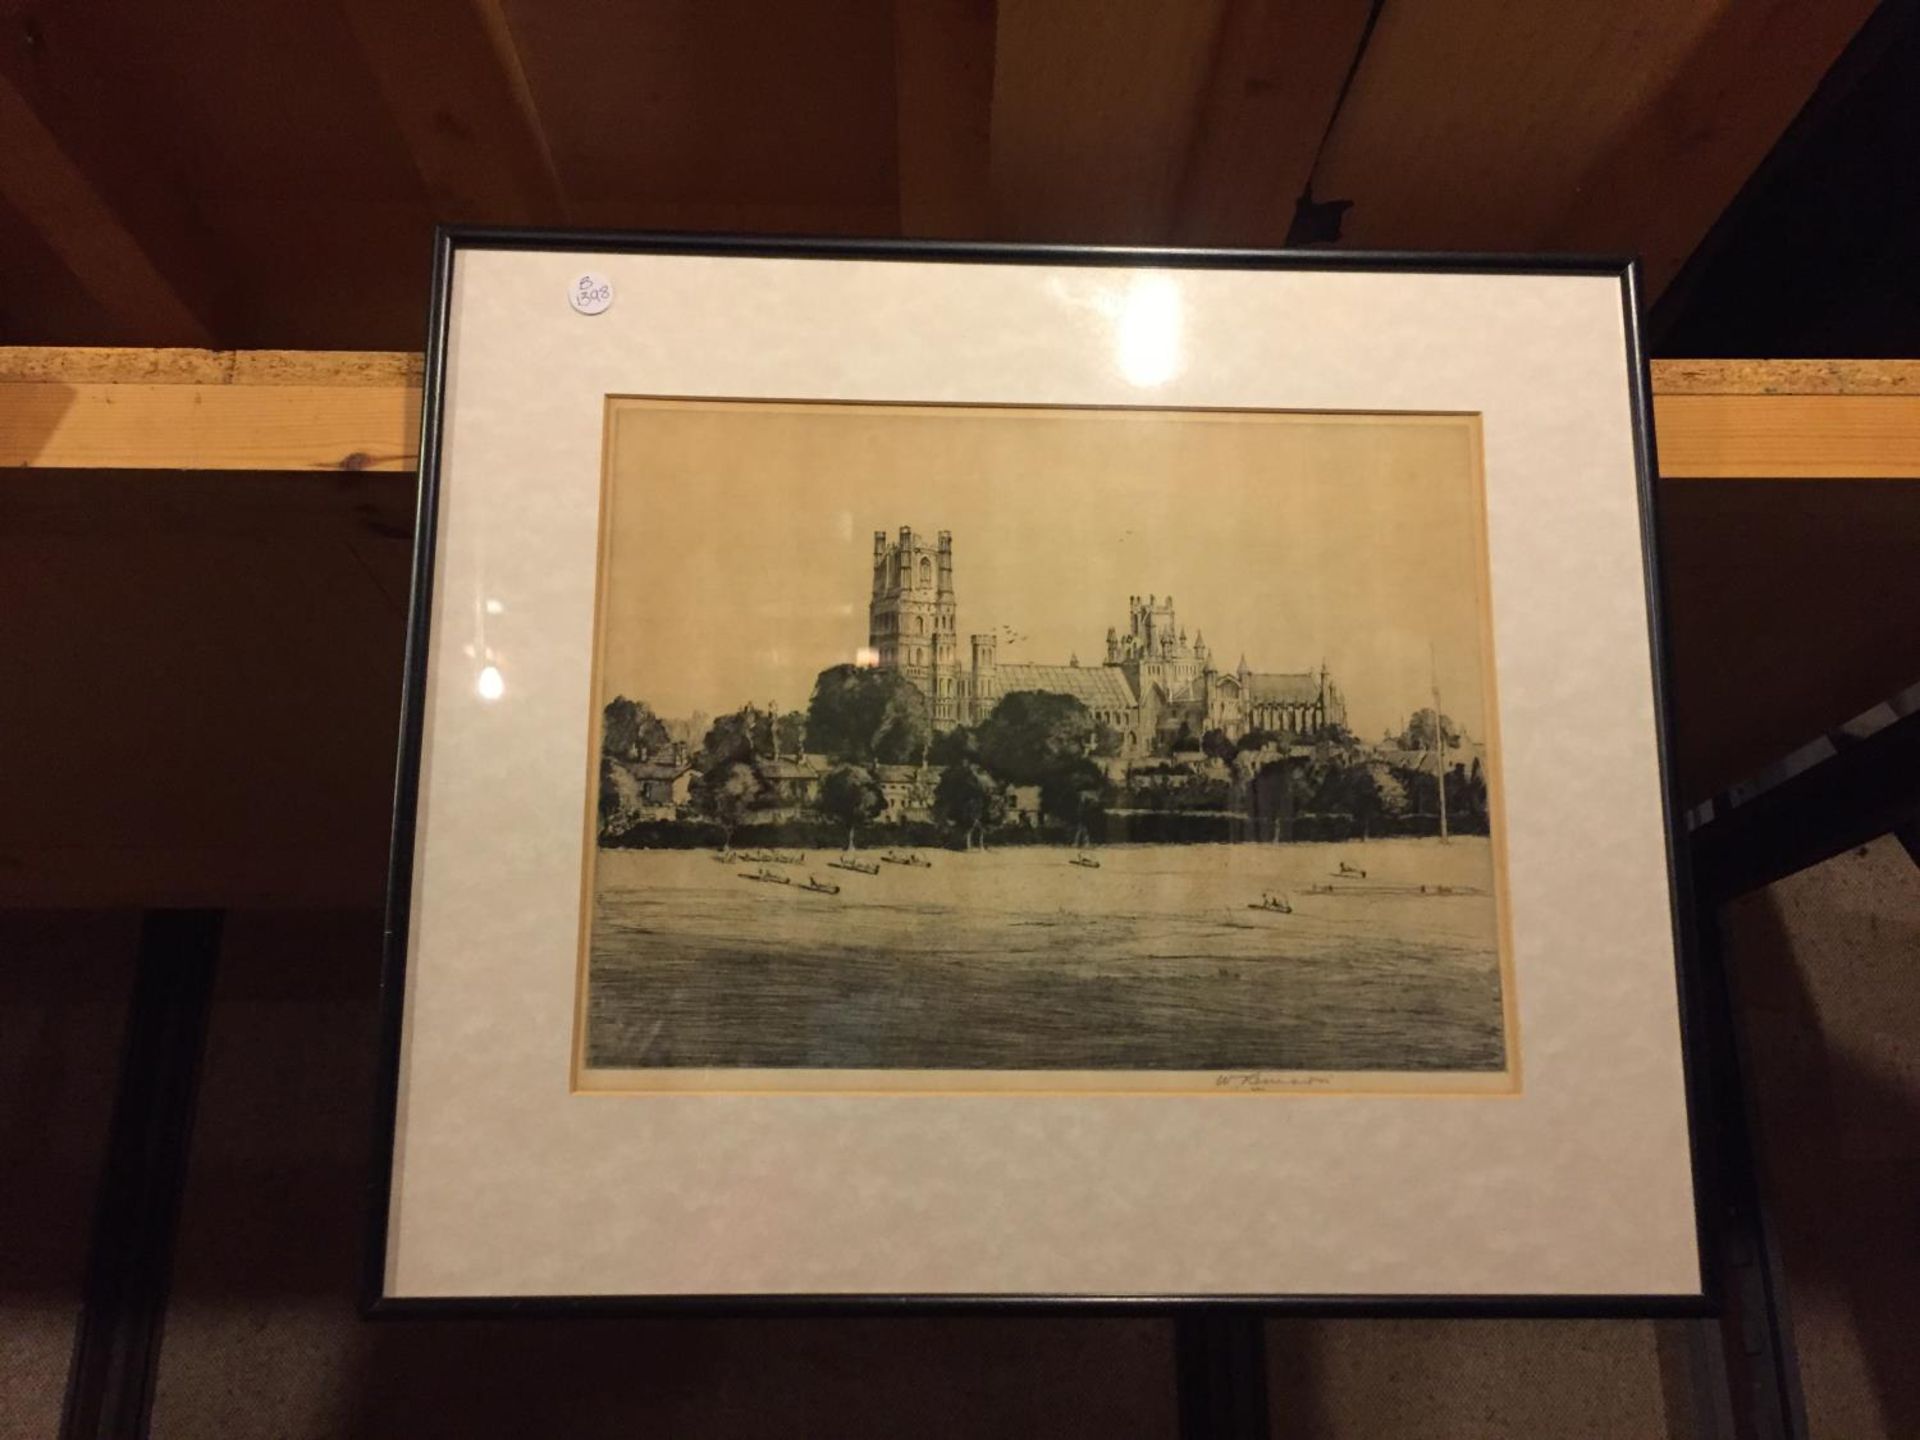 A SIGNED PICTURE OF A CHURCH WITH GRAZING SHEEP IN THE FOREGROUND. INDISTINCT SIGNATURE